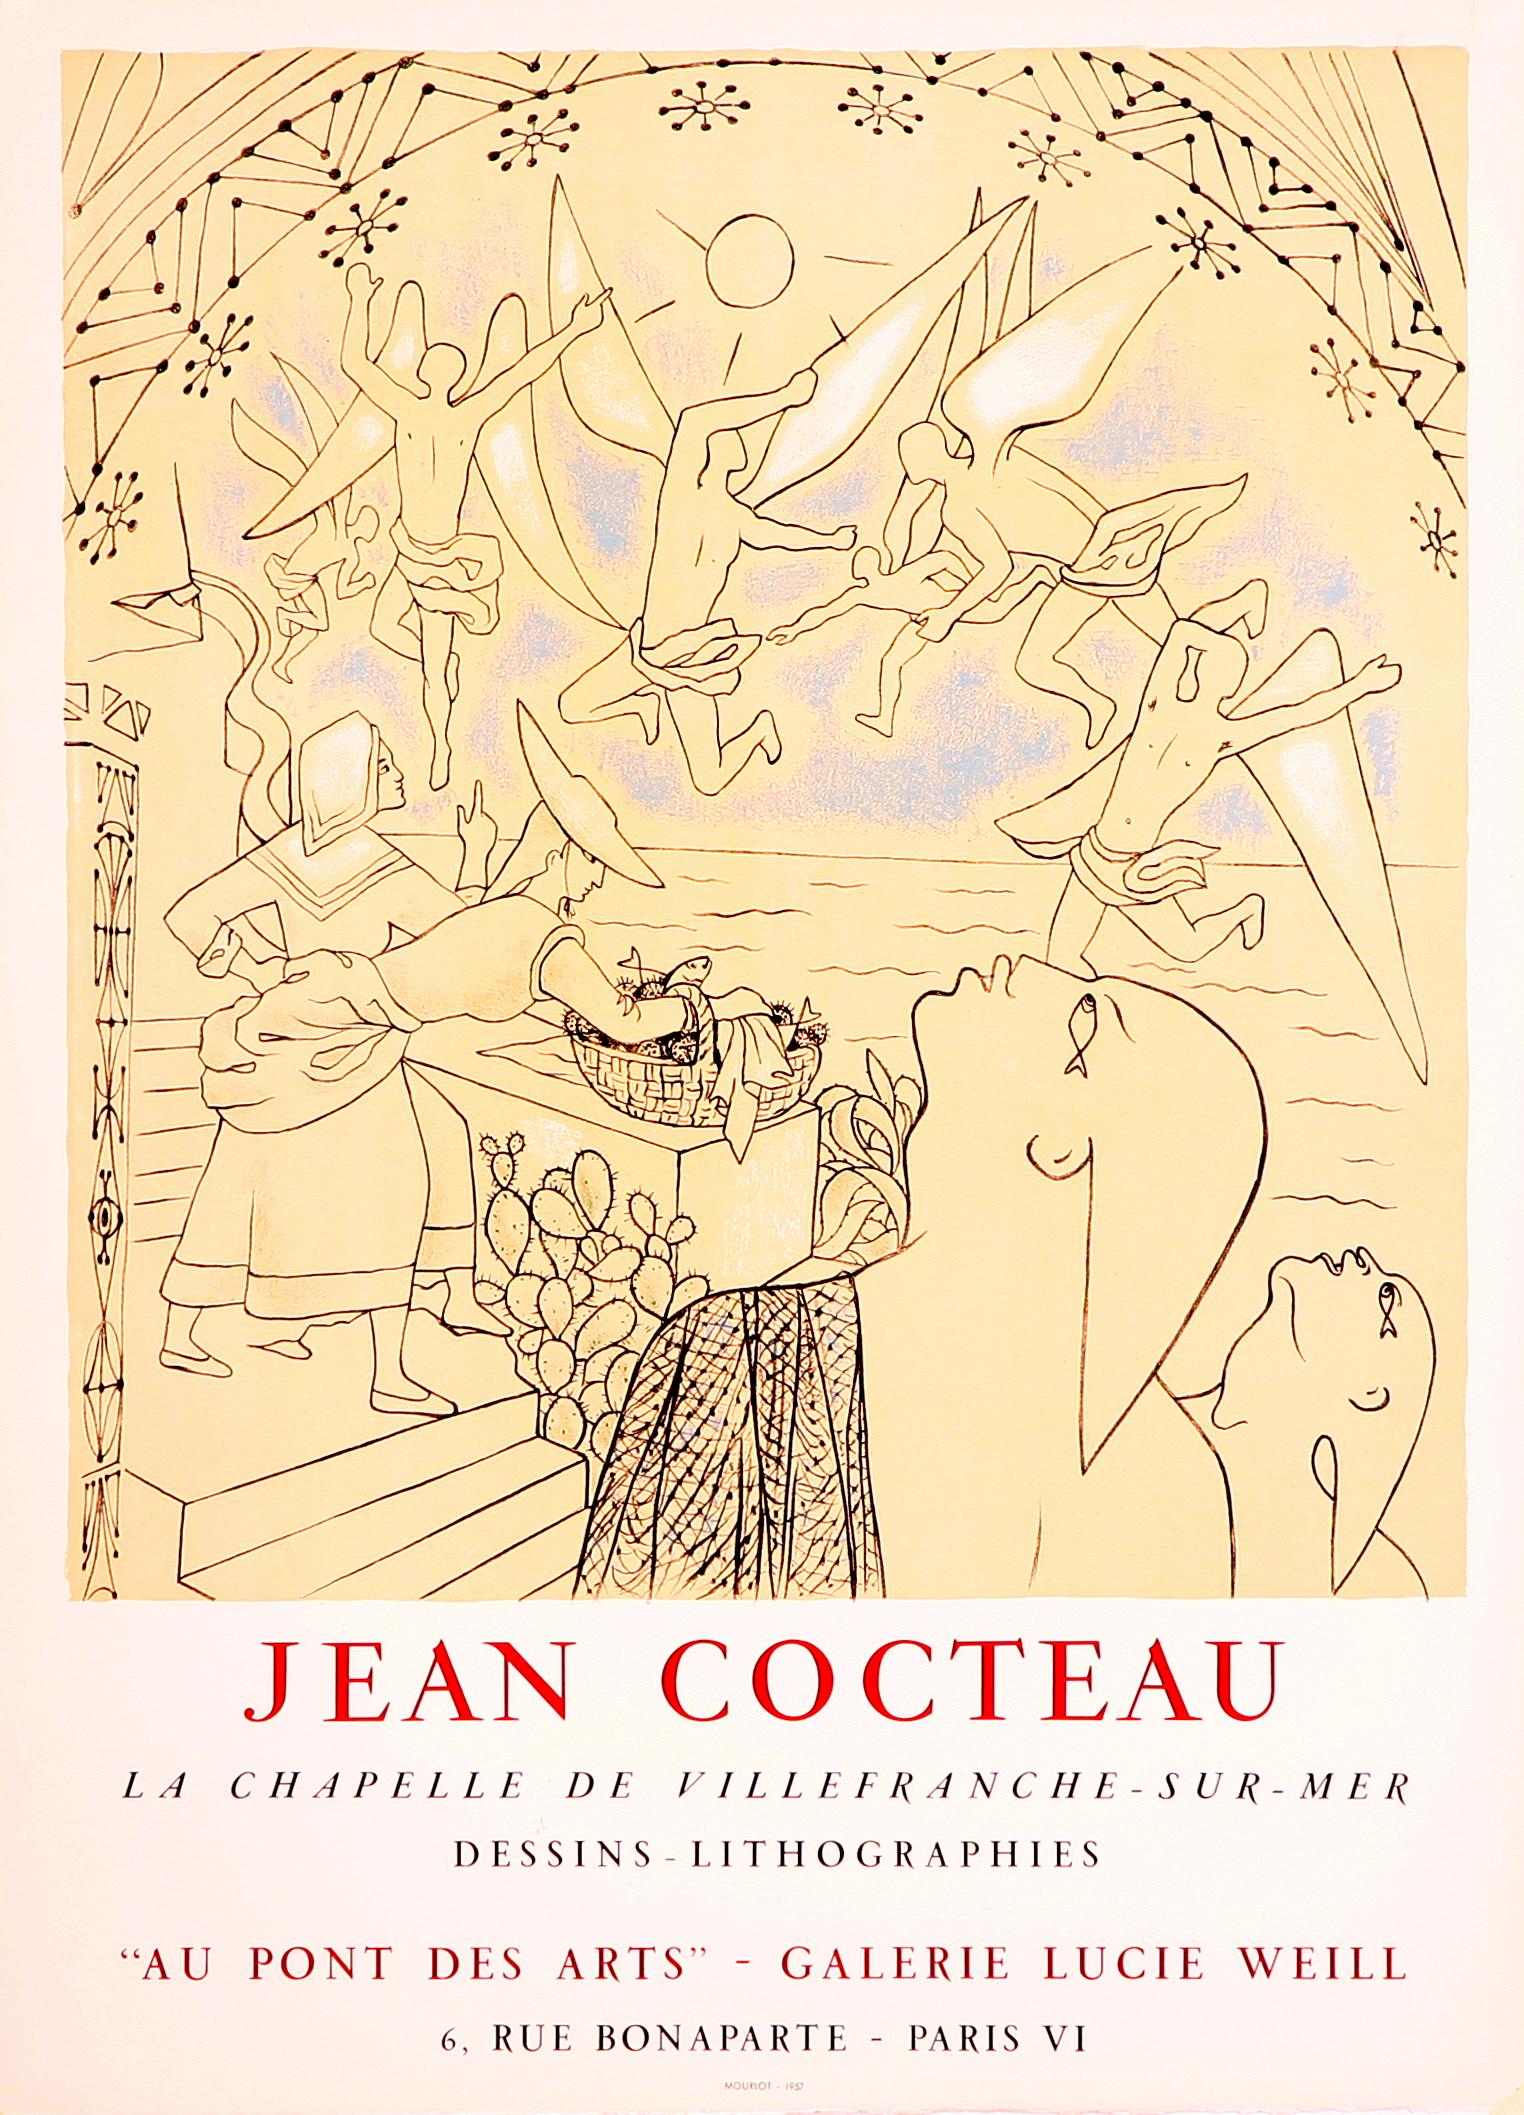 "Art is a mirage of the conscious and the unconscious."
-Jean Cocteau

This original lithographic poster by Jean Cocteau was created for an exhibition of works related to his project at the Chapel of Saint Peter in Villefranche-sur-mer, in the South